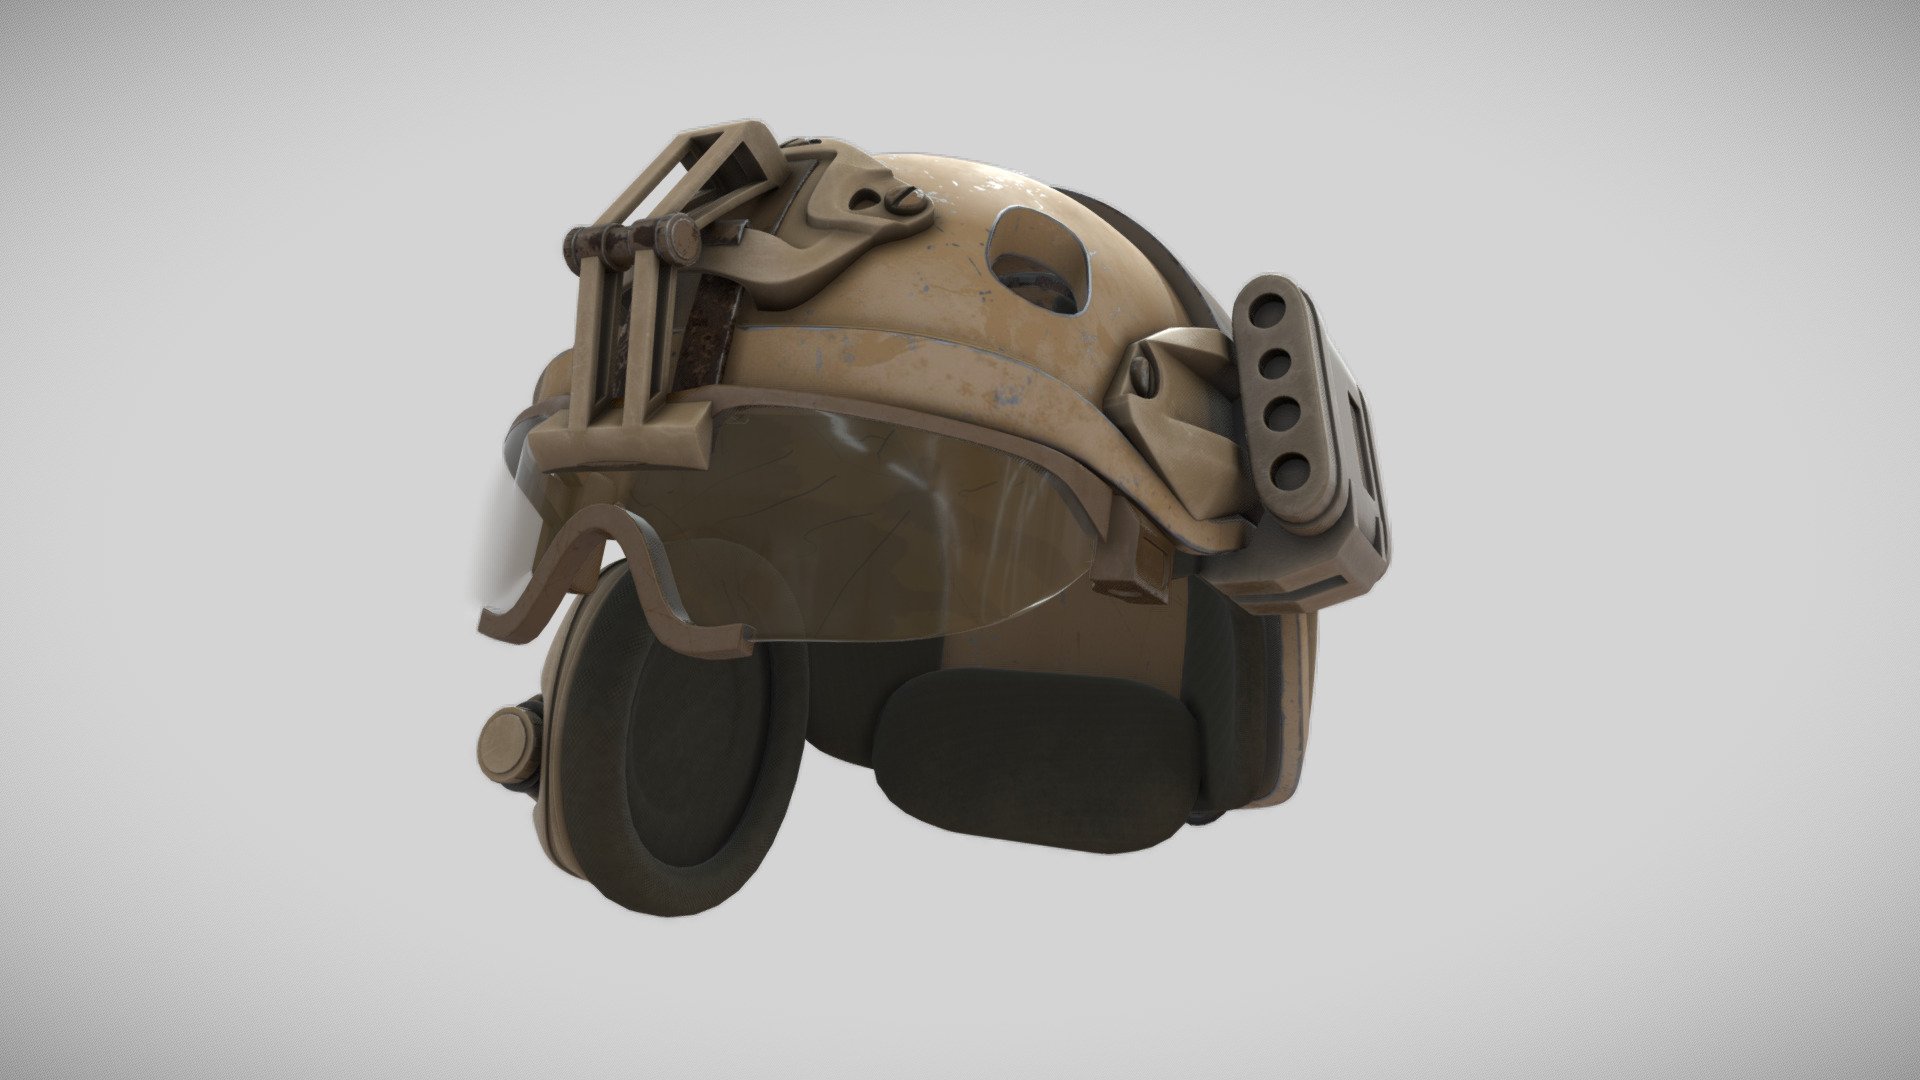 3D model of a Military helmet I made in 2021 for a client - Military Helmet - 3D model by 3DJam (@3djamzrw) 3d model